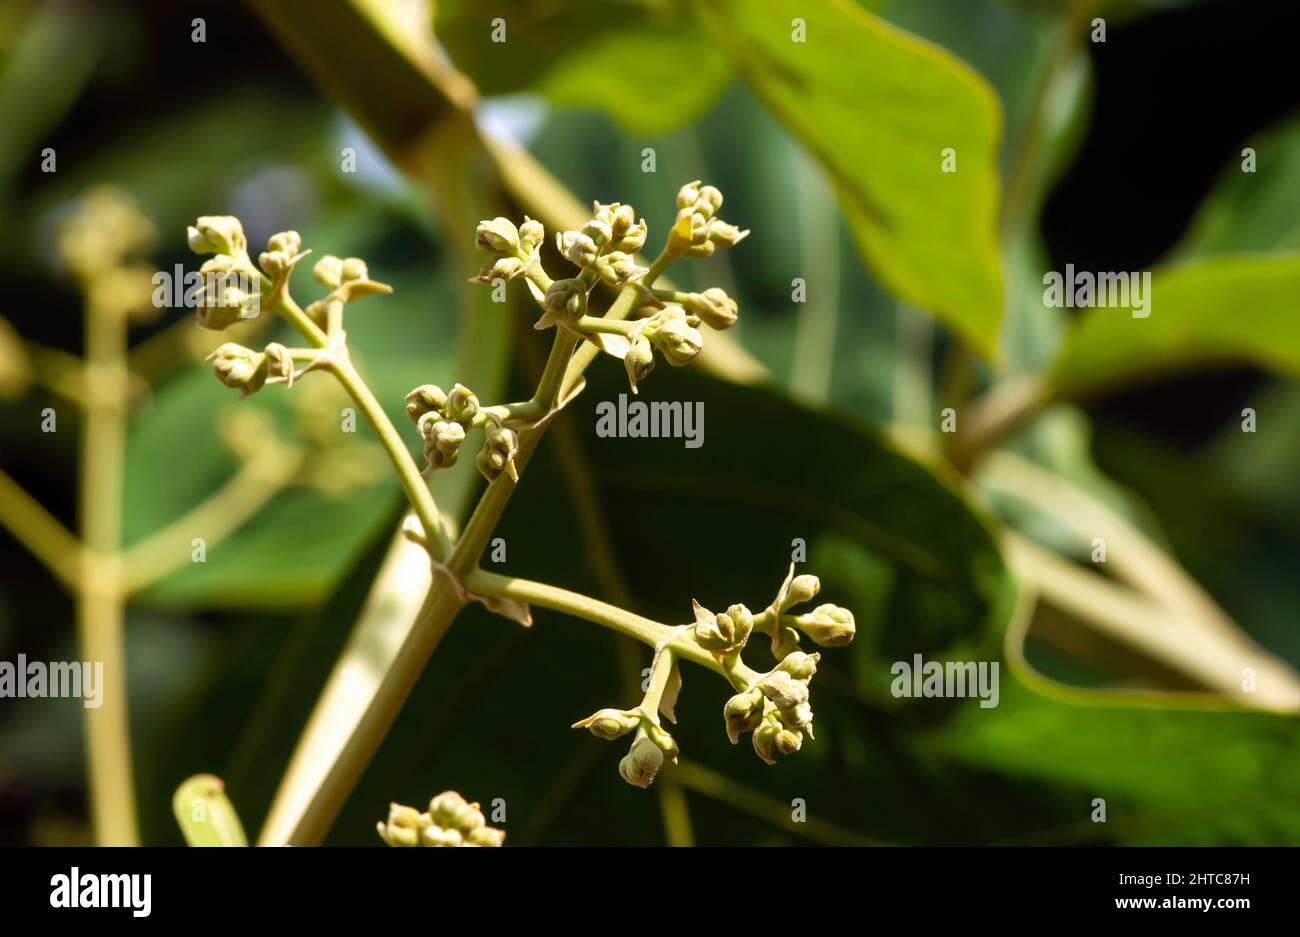 Teak flower buds (Tectona grandis), in shallow focus, arranged in dense clusters at the end of the branches Stock Photo